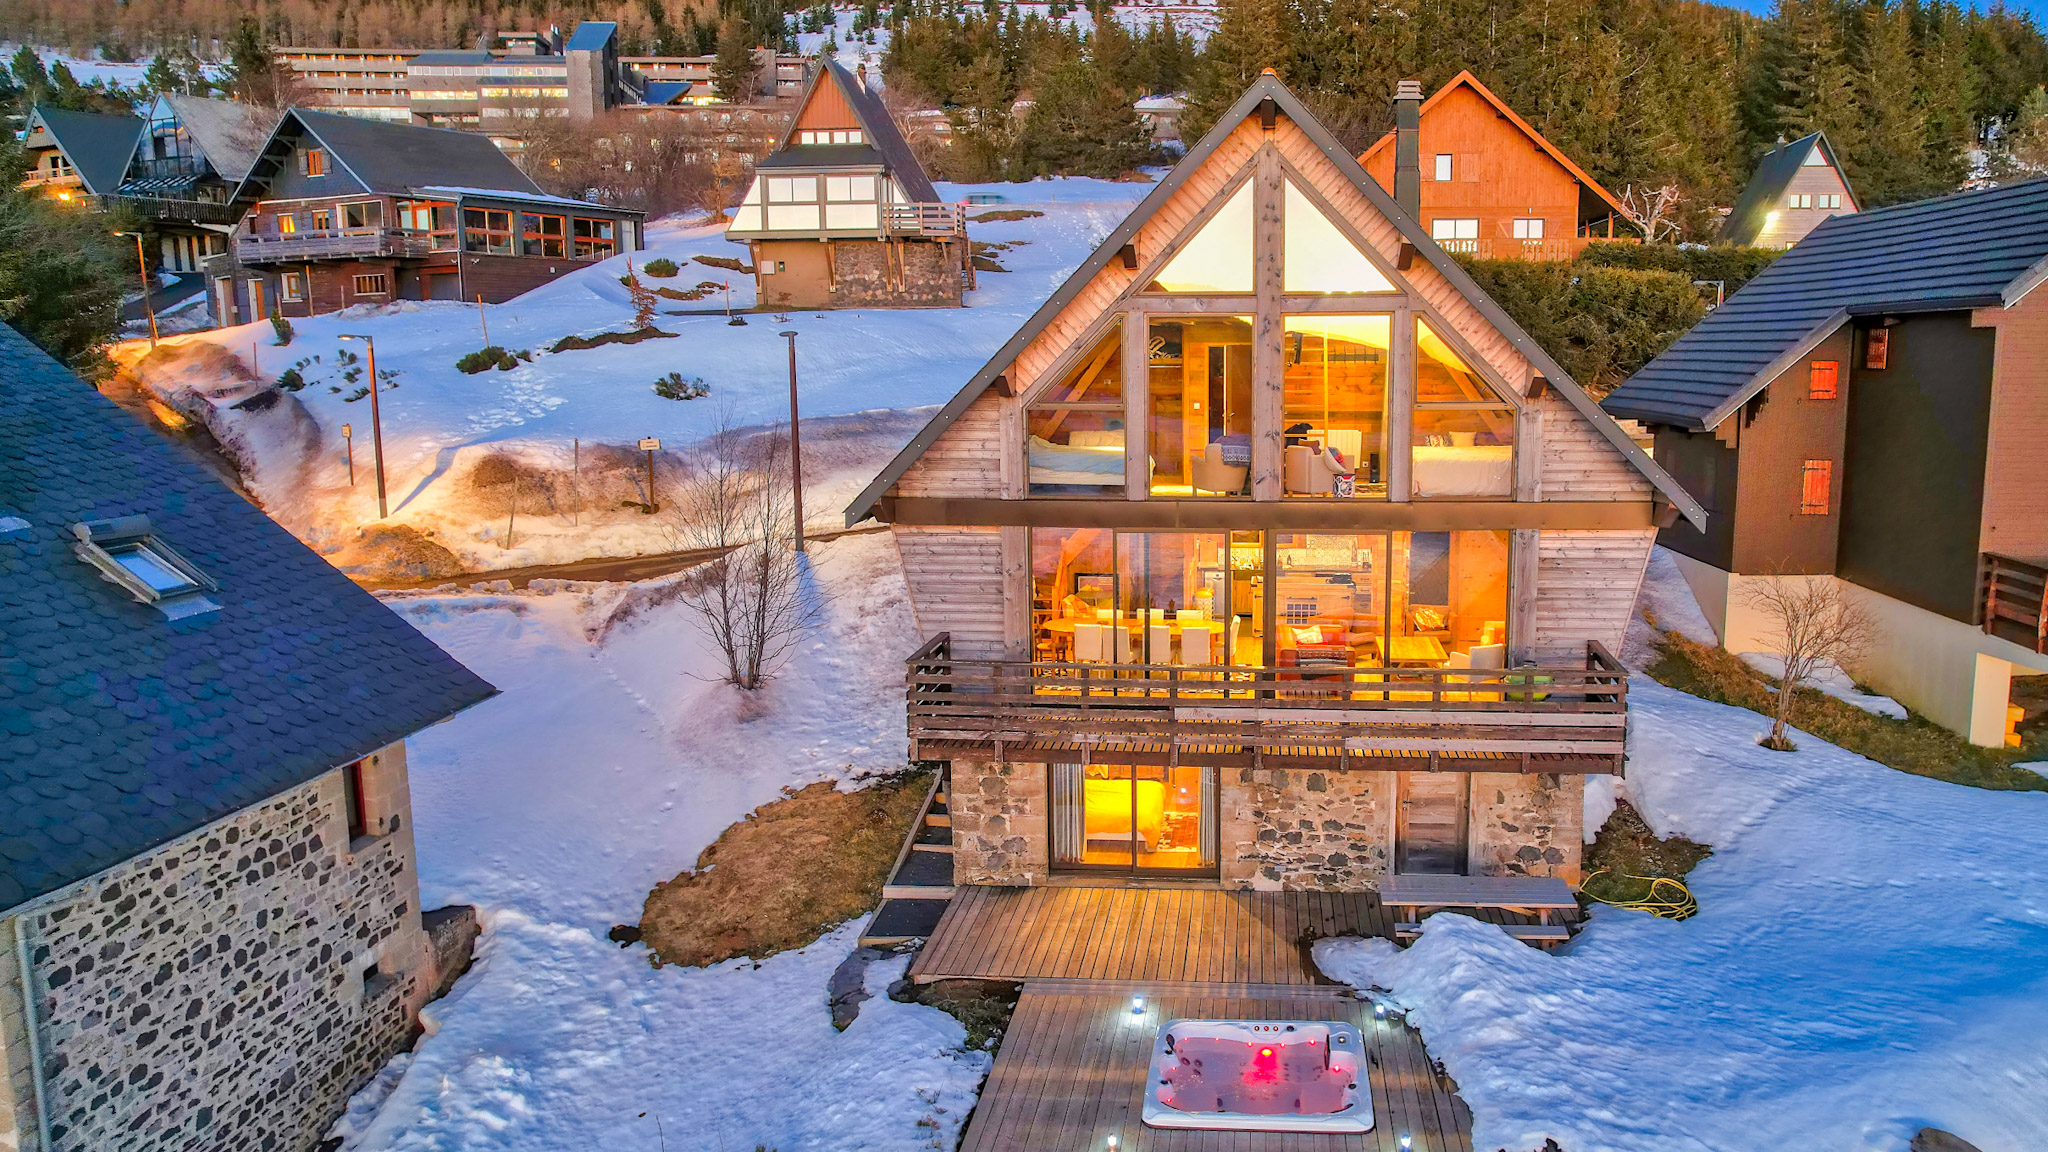 Super Besse chalet rental at the foot of the slopes